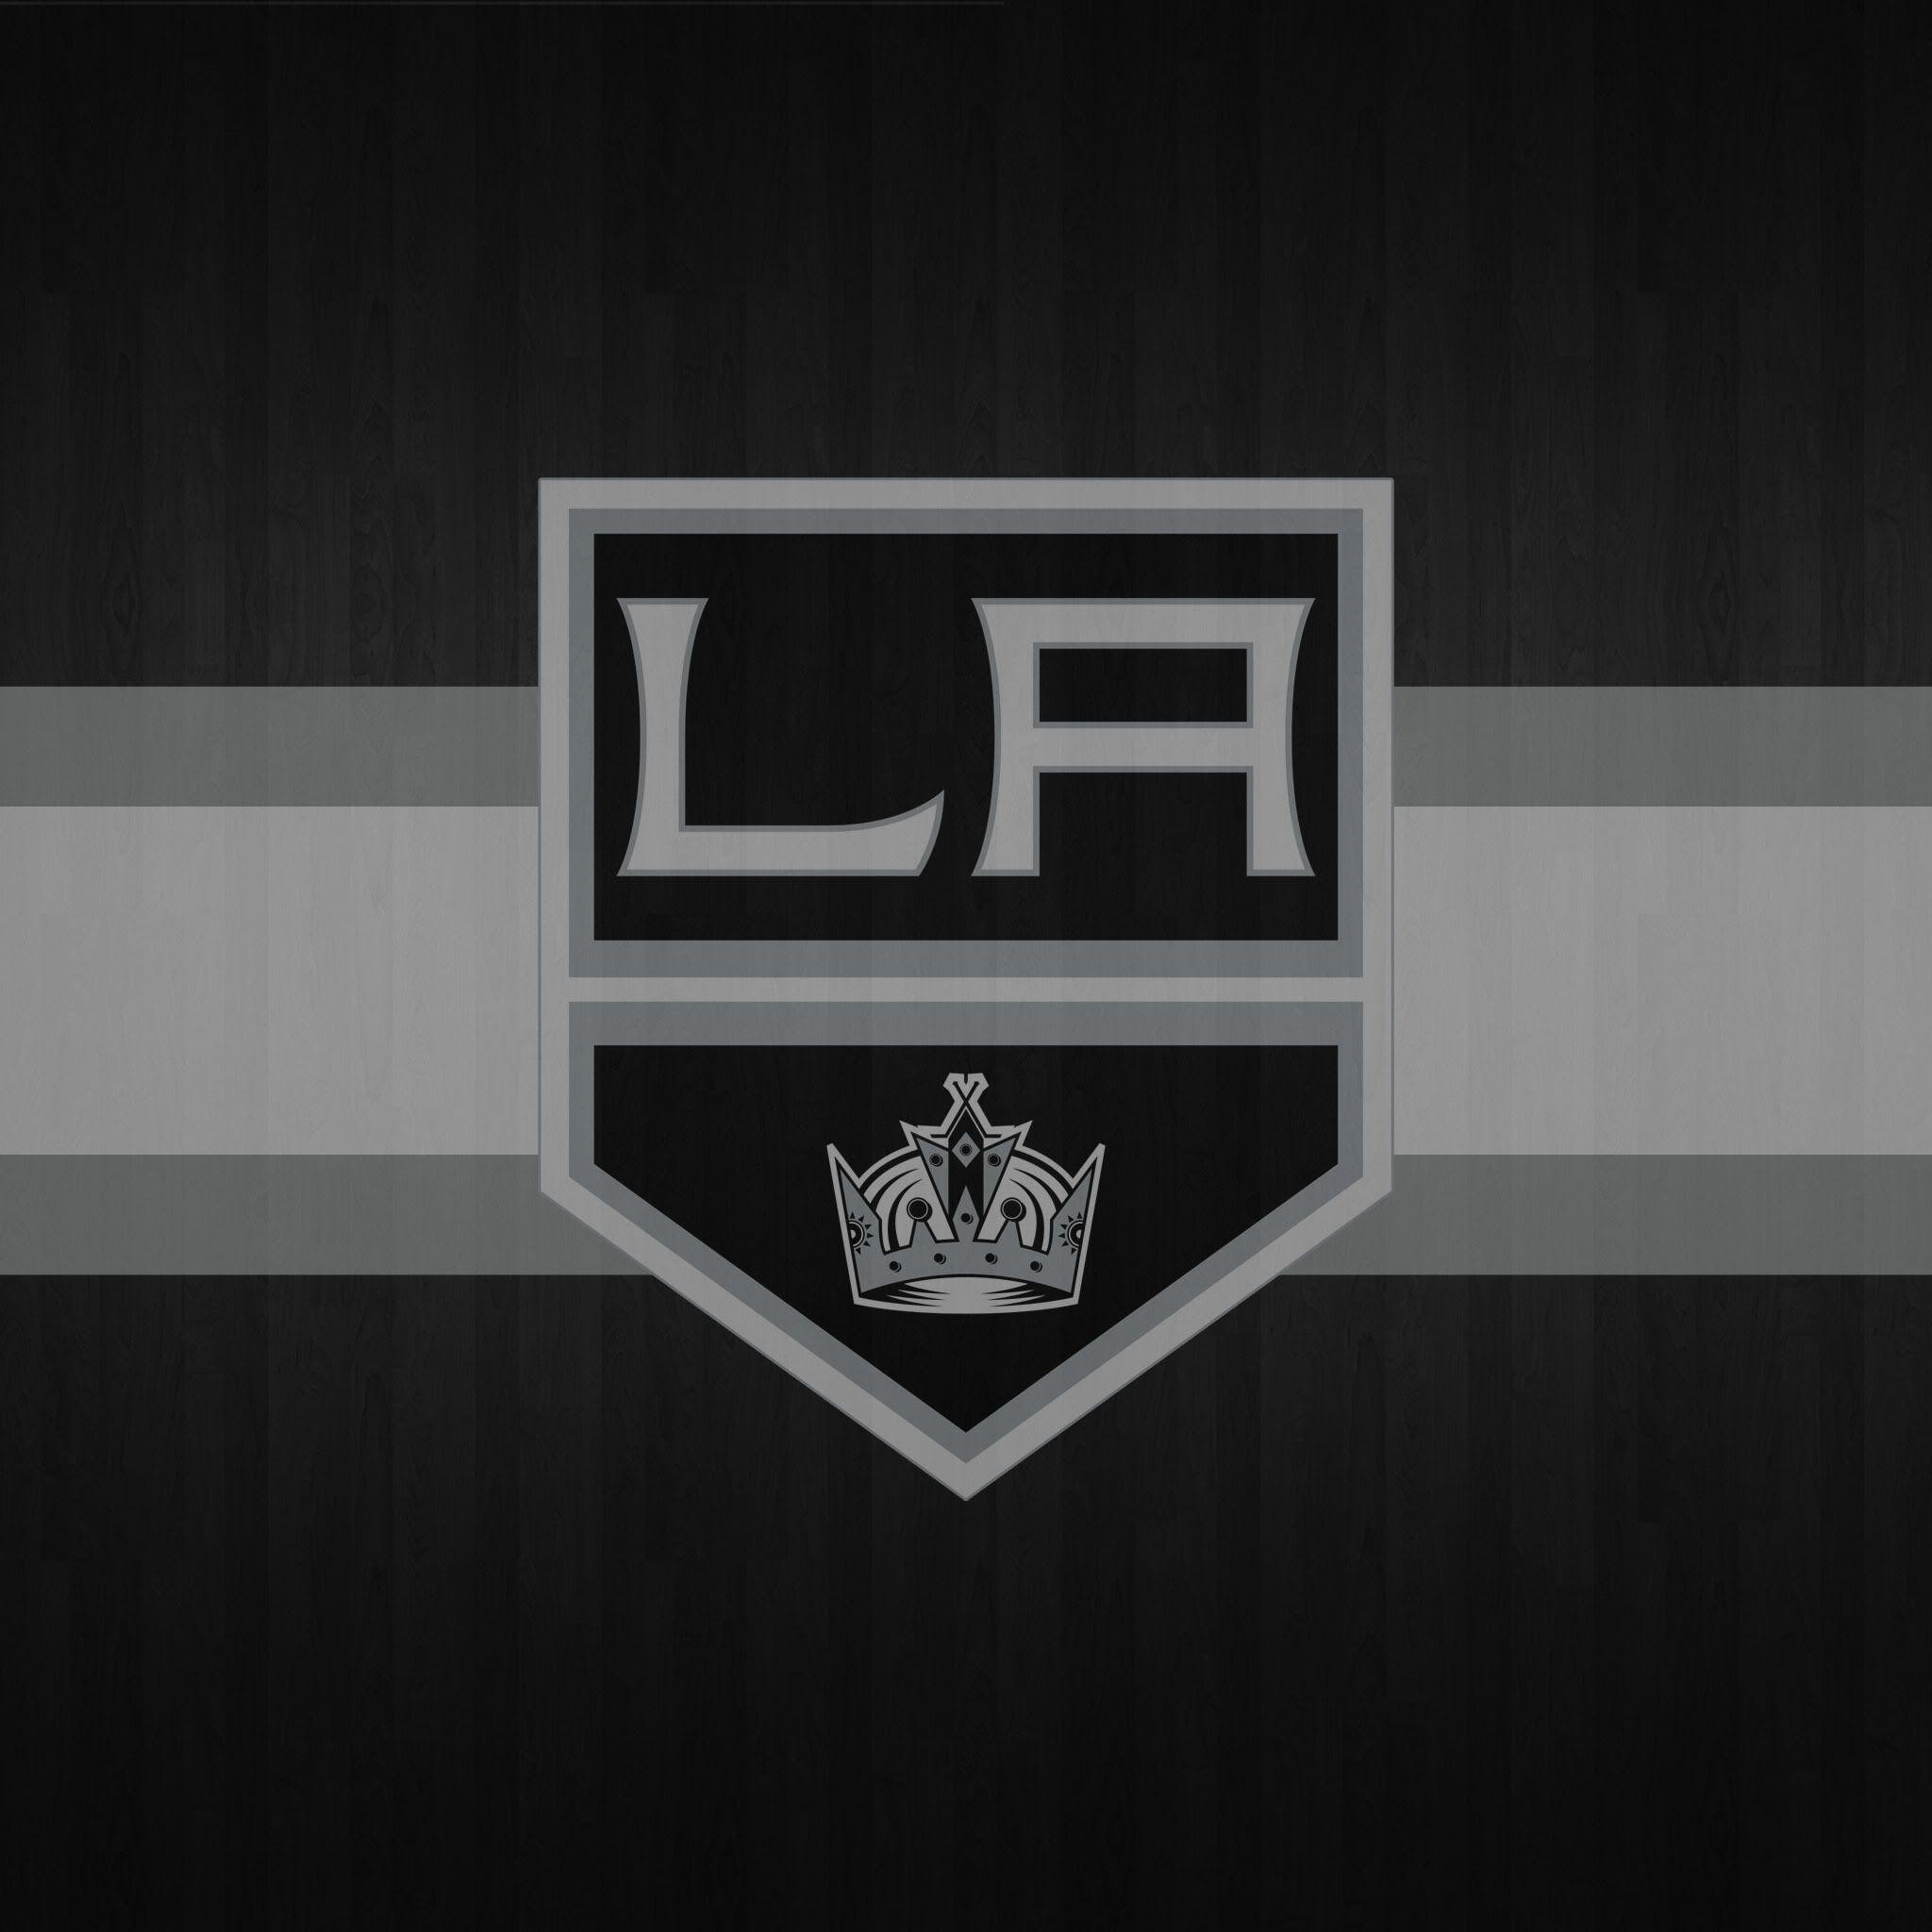 Download free HD wallpaper from above link sports  LosAngelesKingsWallpaper LosAngelesKingsWallpaperIphone  La kings Los  angeles kings logo Los angeles kings